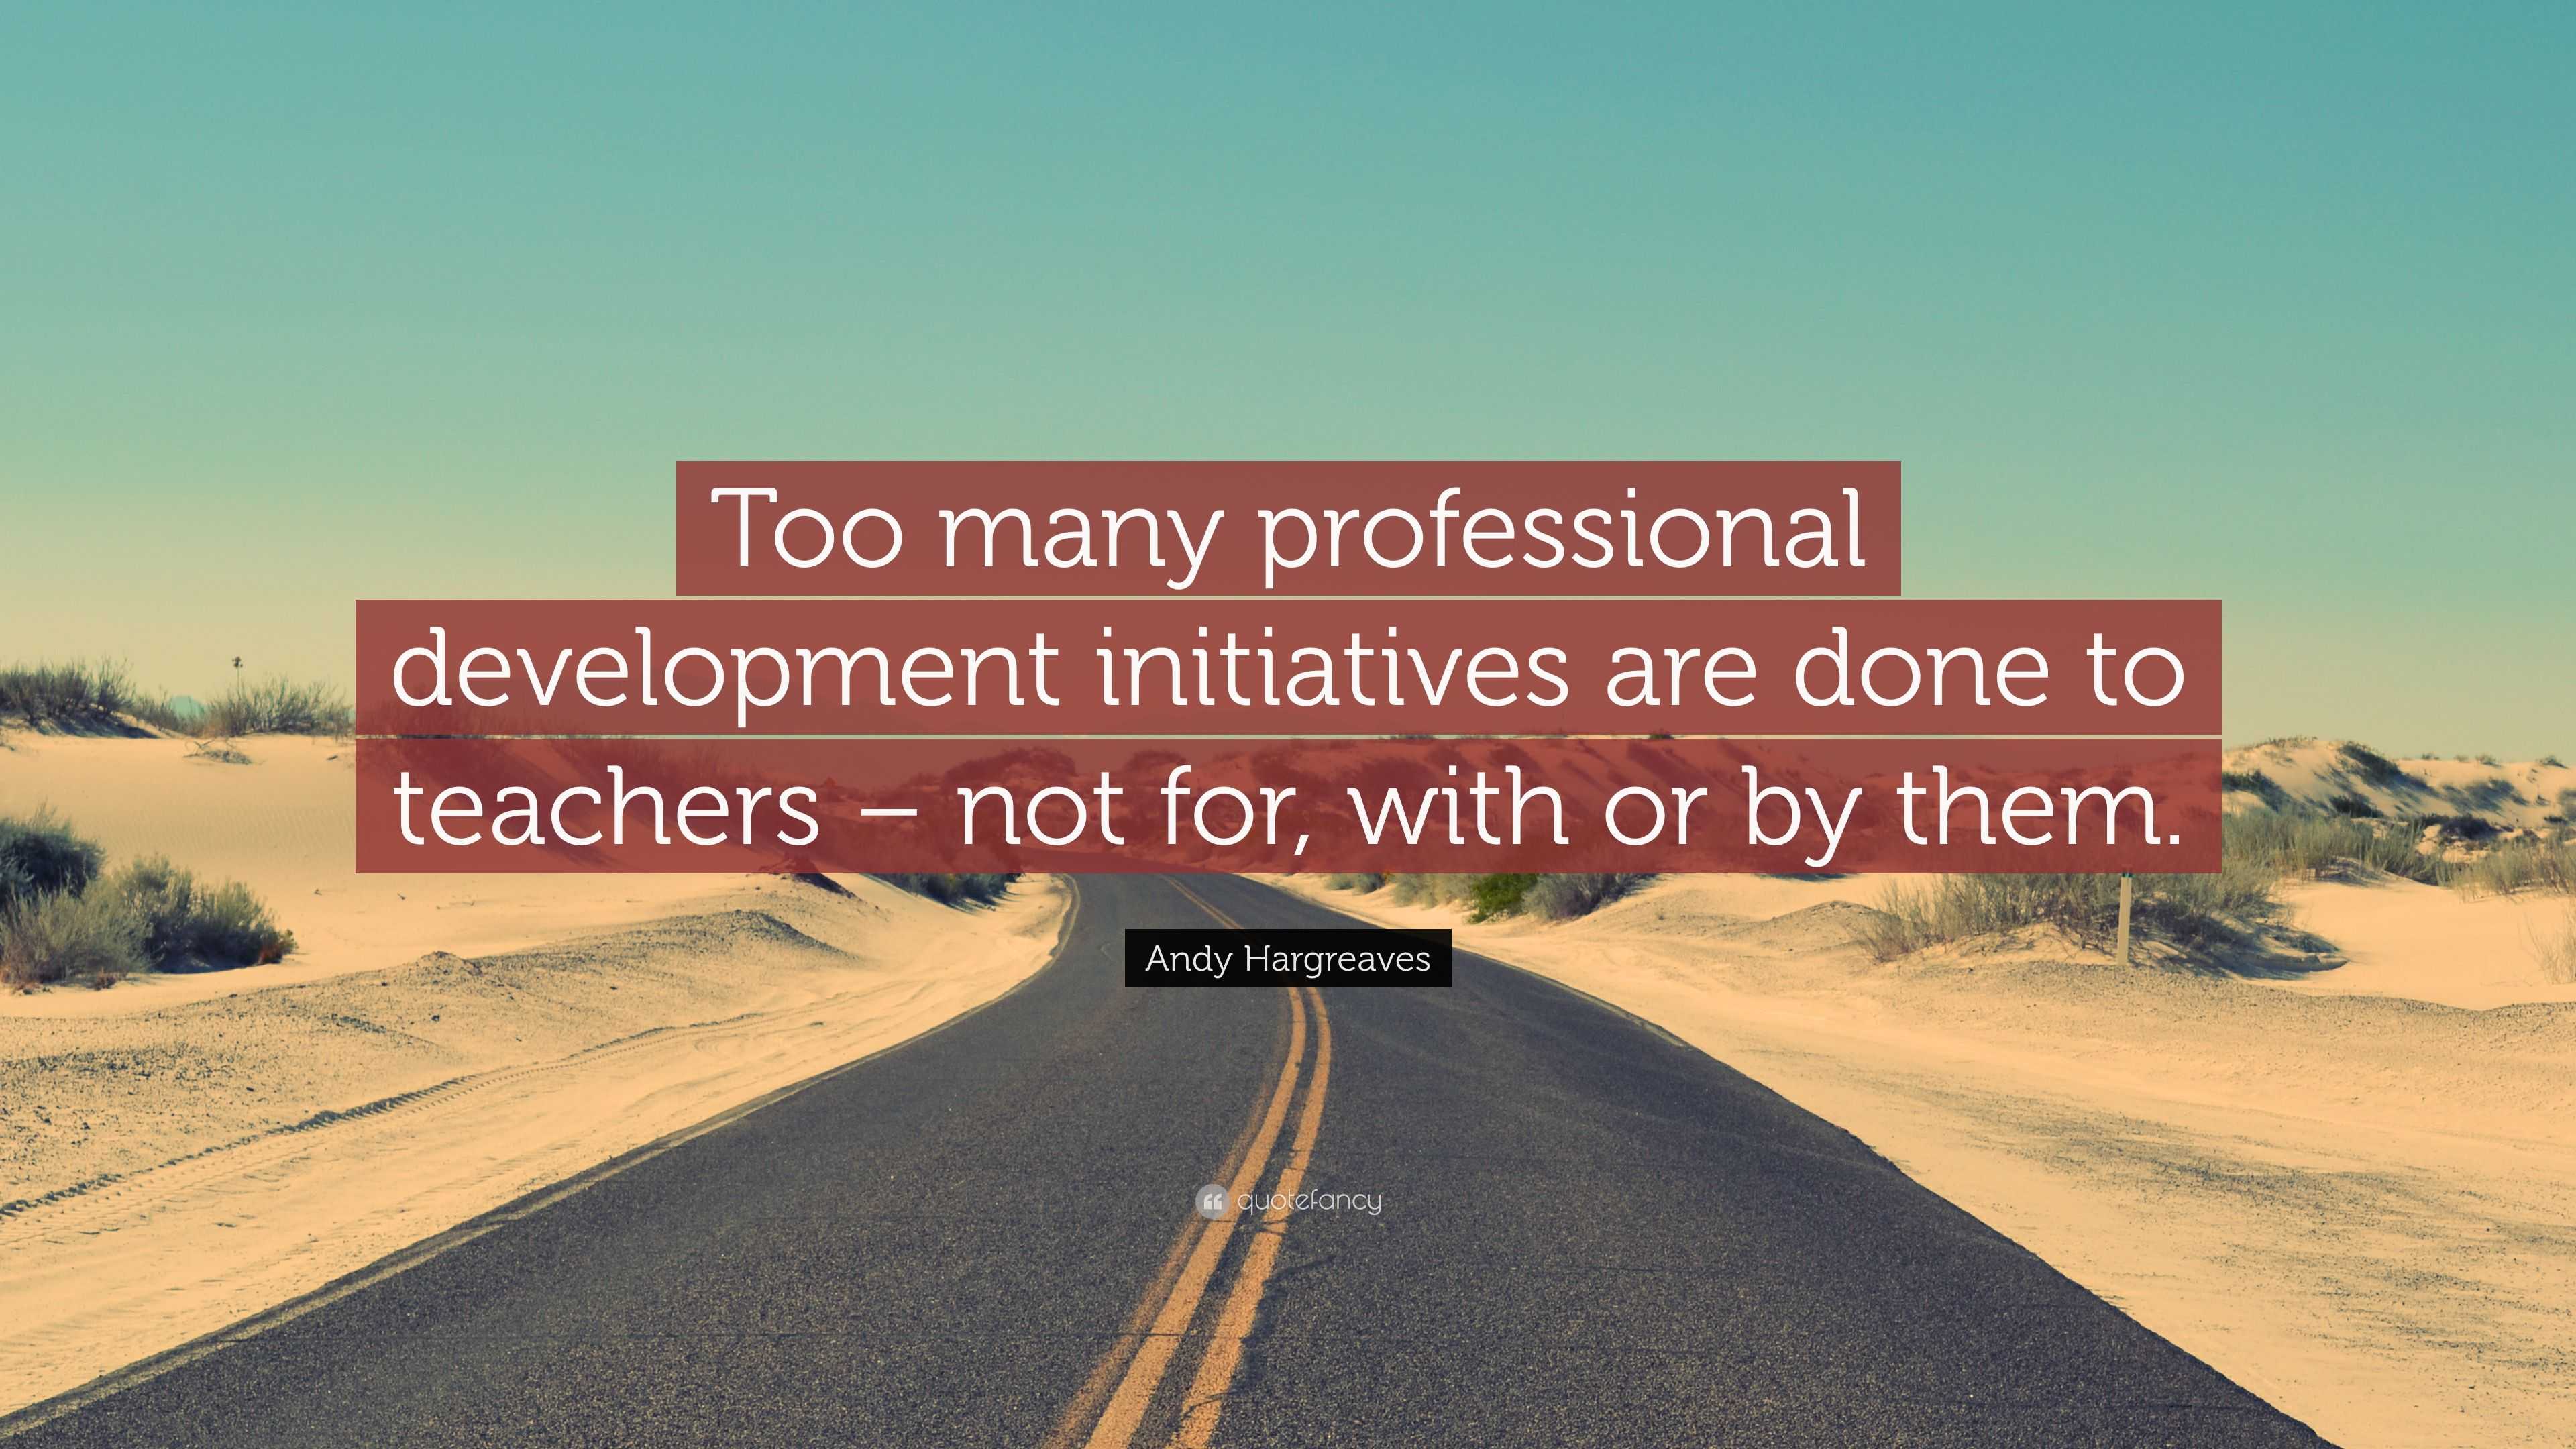 Andy Hargreaves Quote: “Too many professional development initiatives